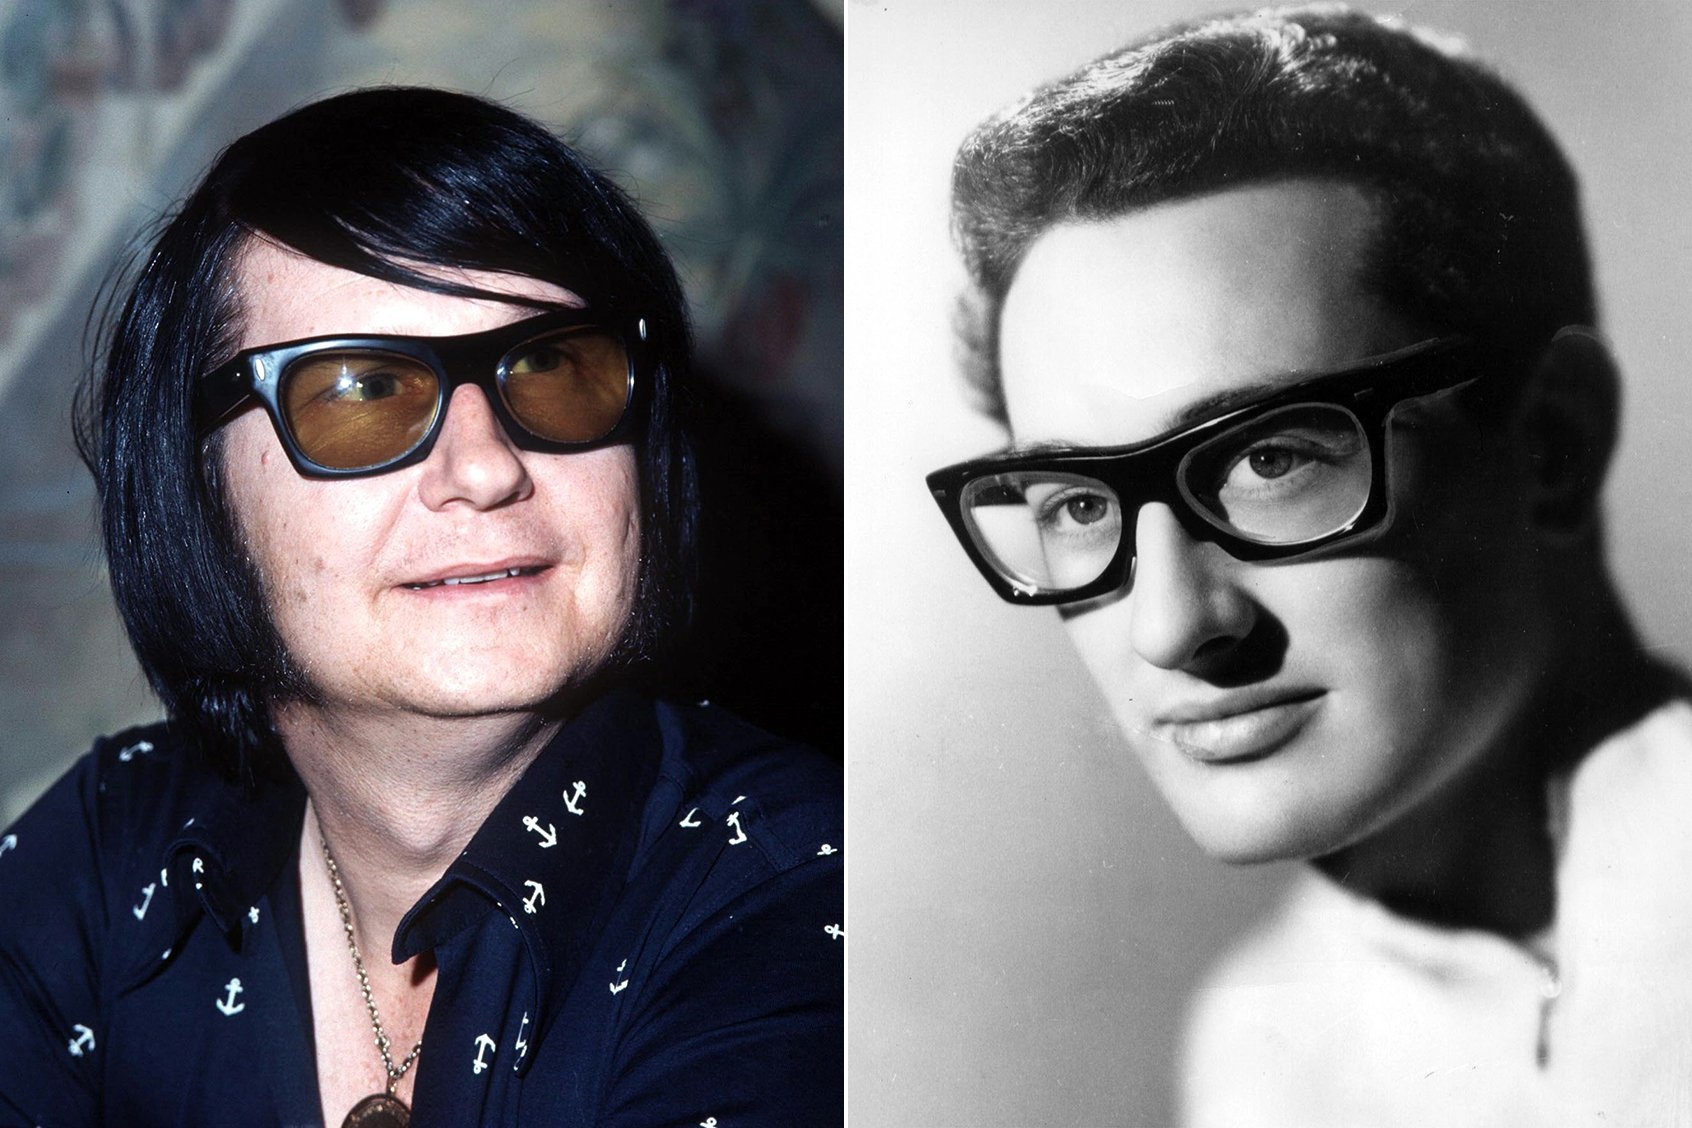 Roy+Orbison+and+Buddy+Holly